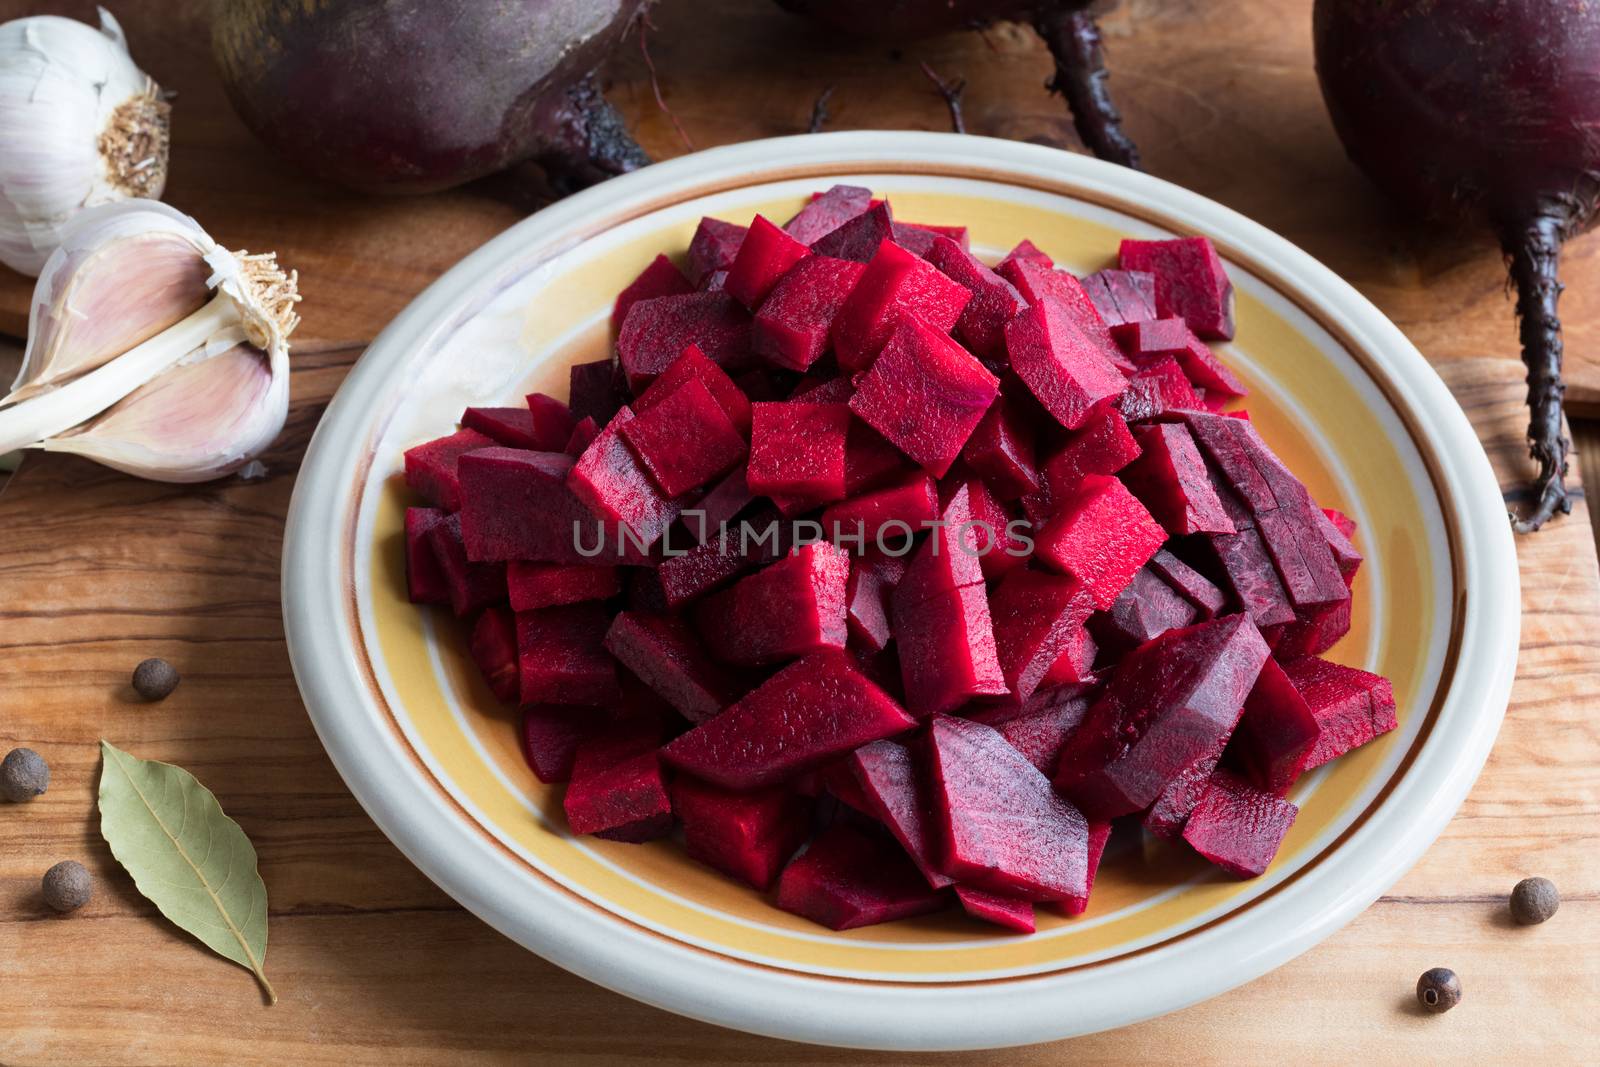 Preparation of fermented beets - sliced red beets on a plate, with whole beets, onions, garlic and spices in the background